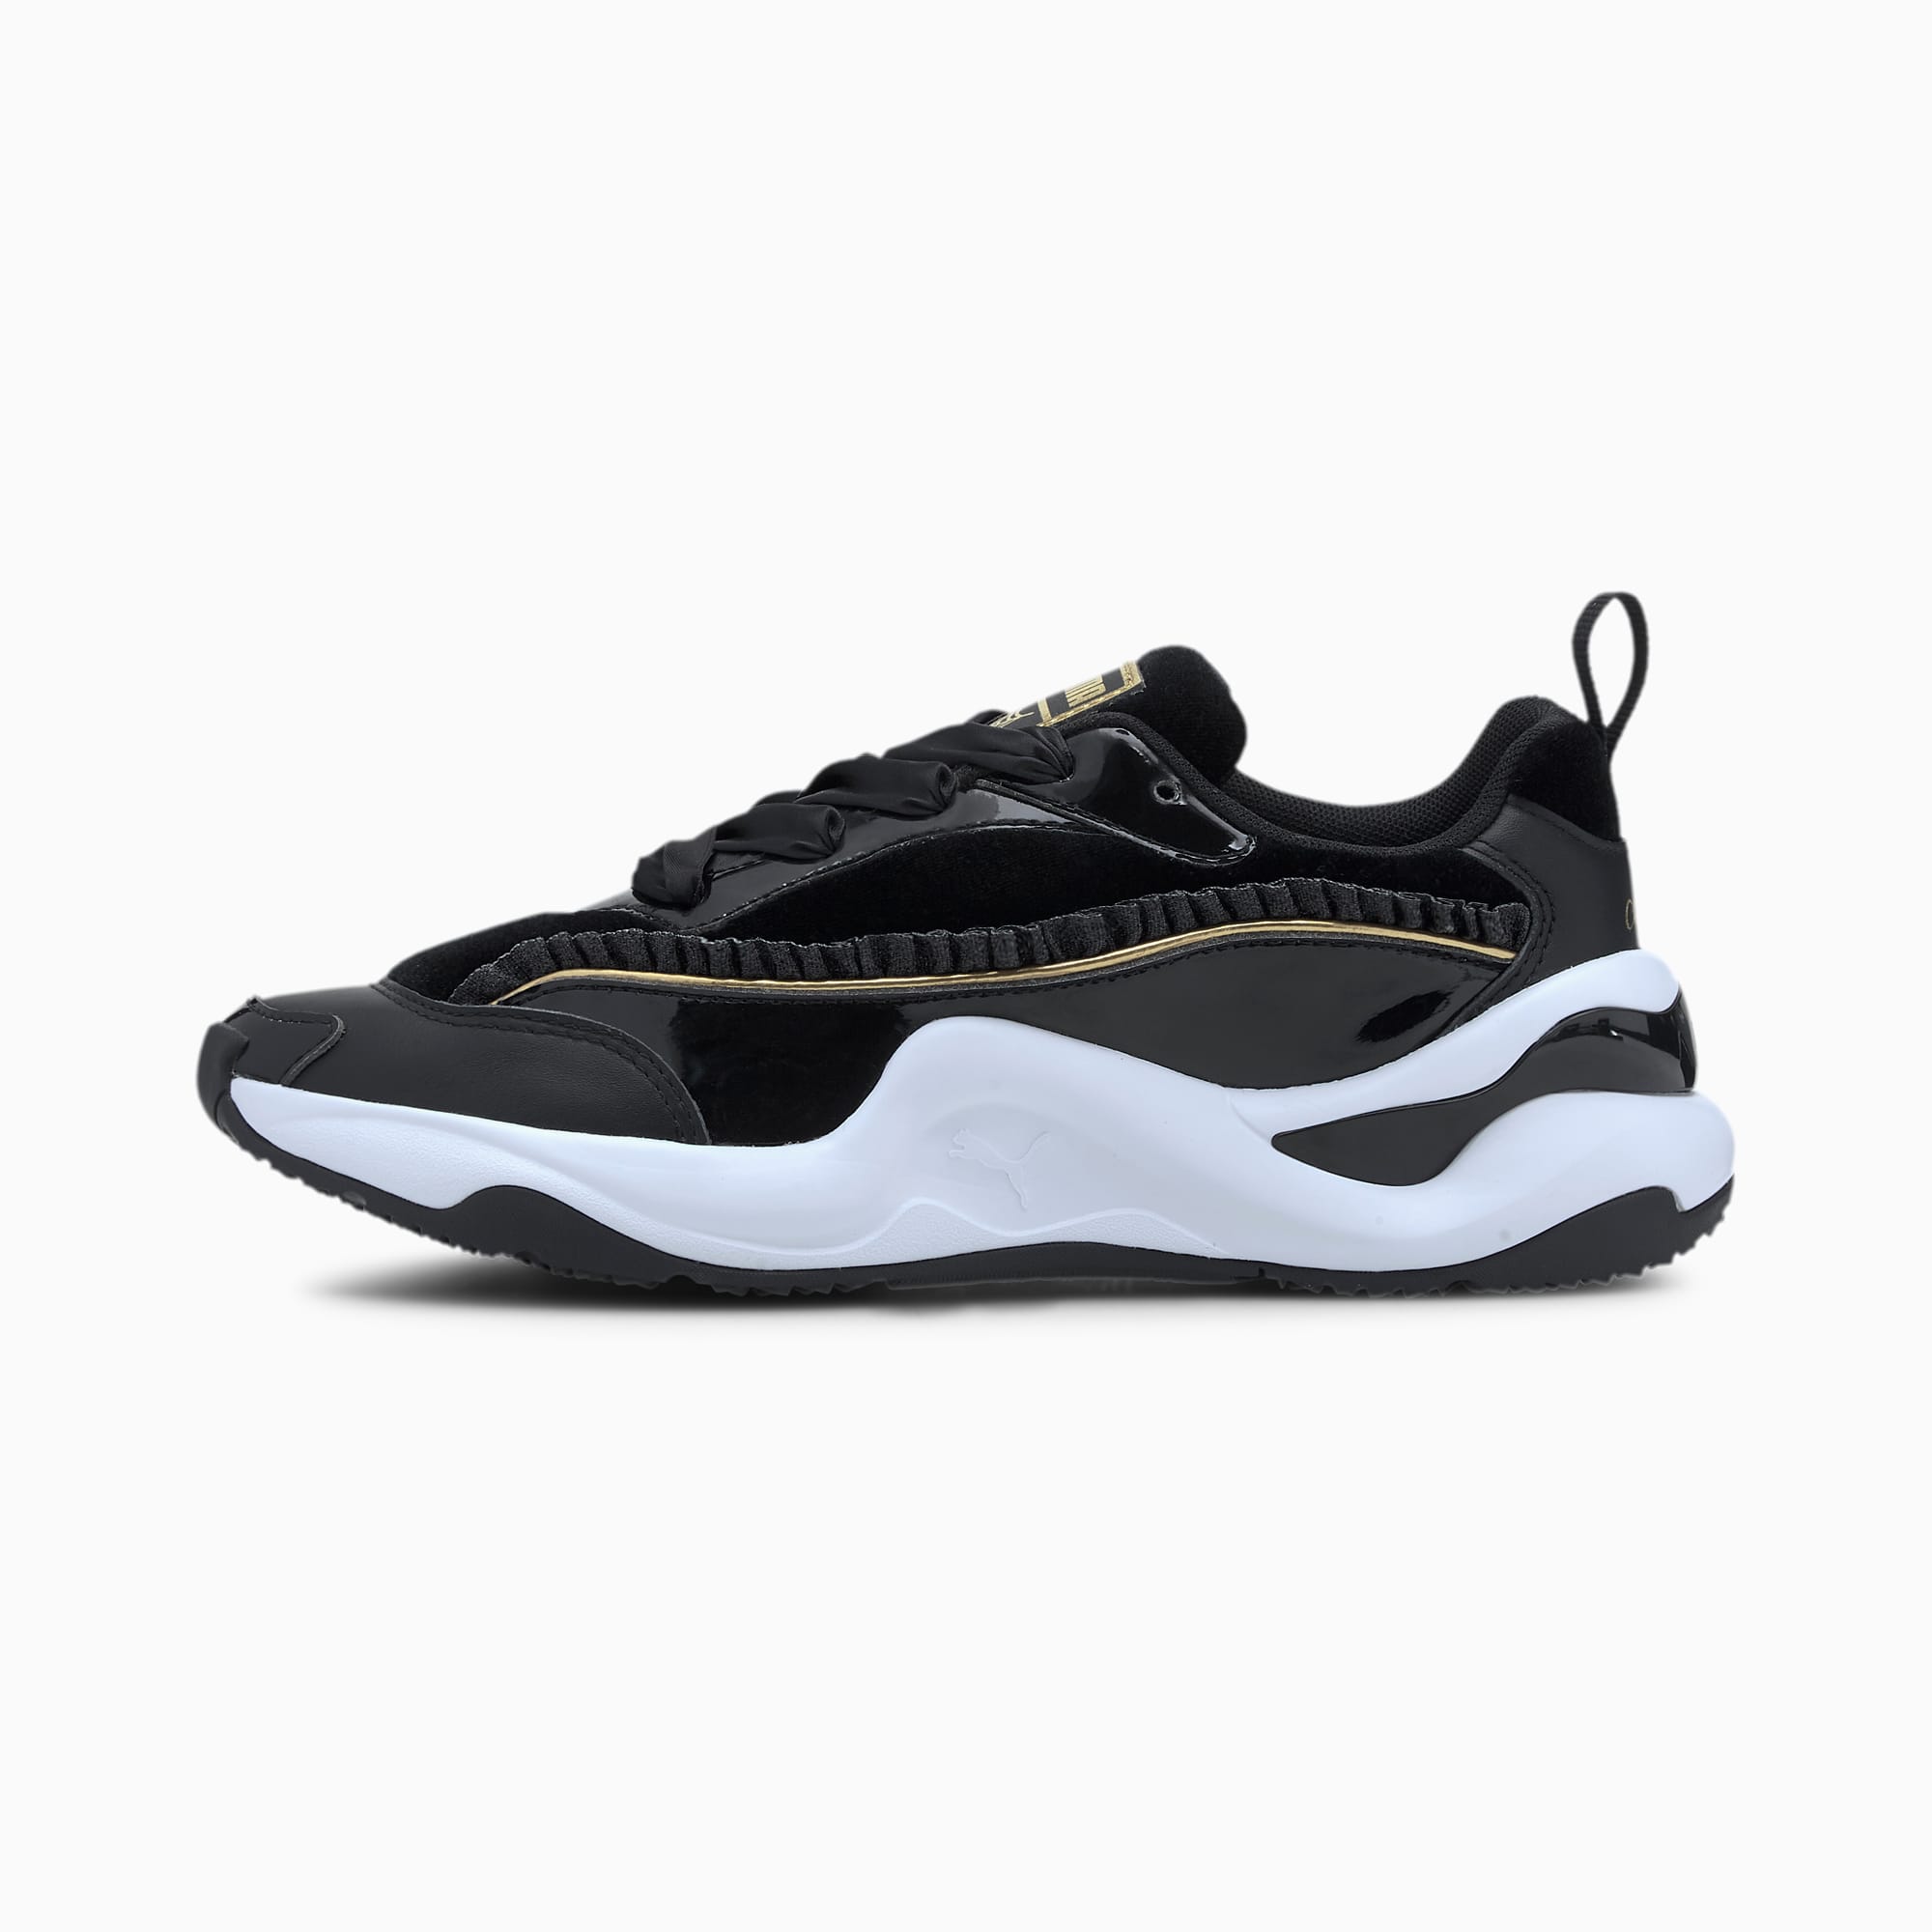 Chaussure Basket PUMA x CHARLOTTE OLYMPIA Rise NU pour Femme, Noir, Taille 40, Chaussures